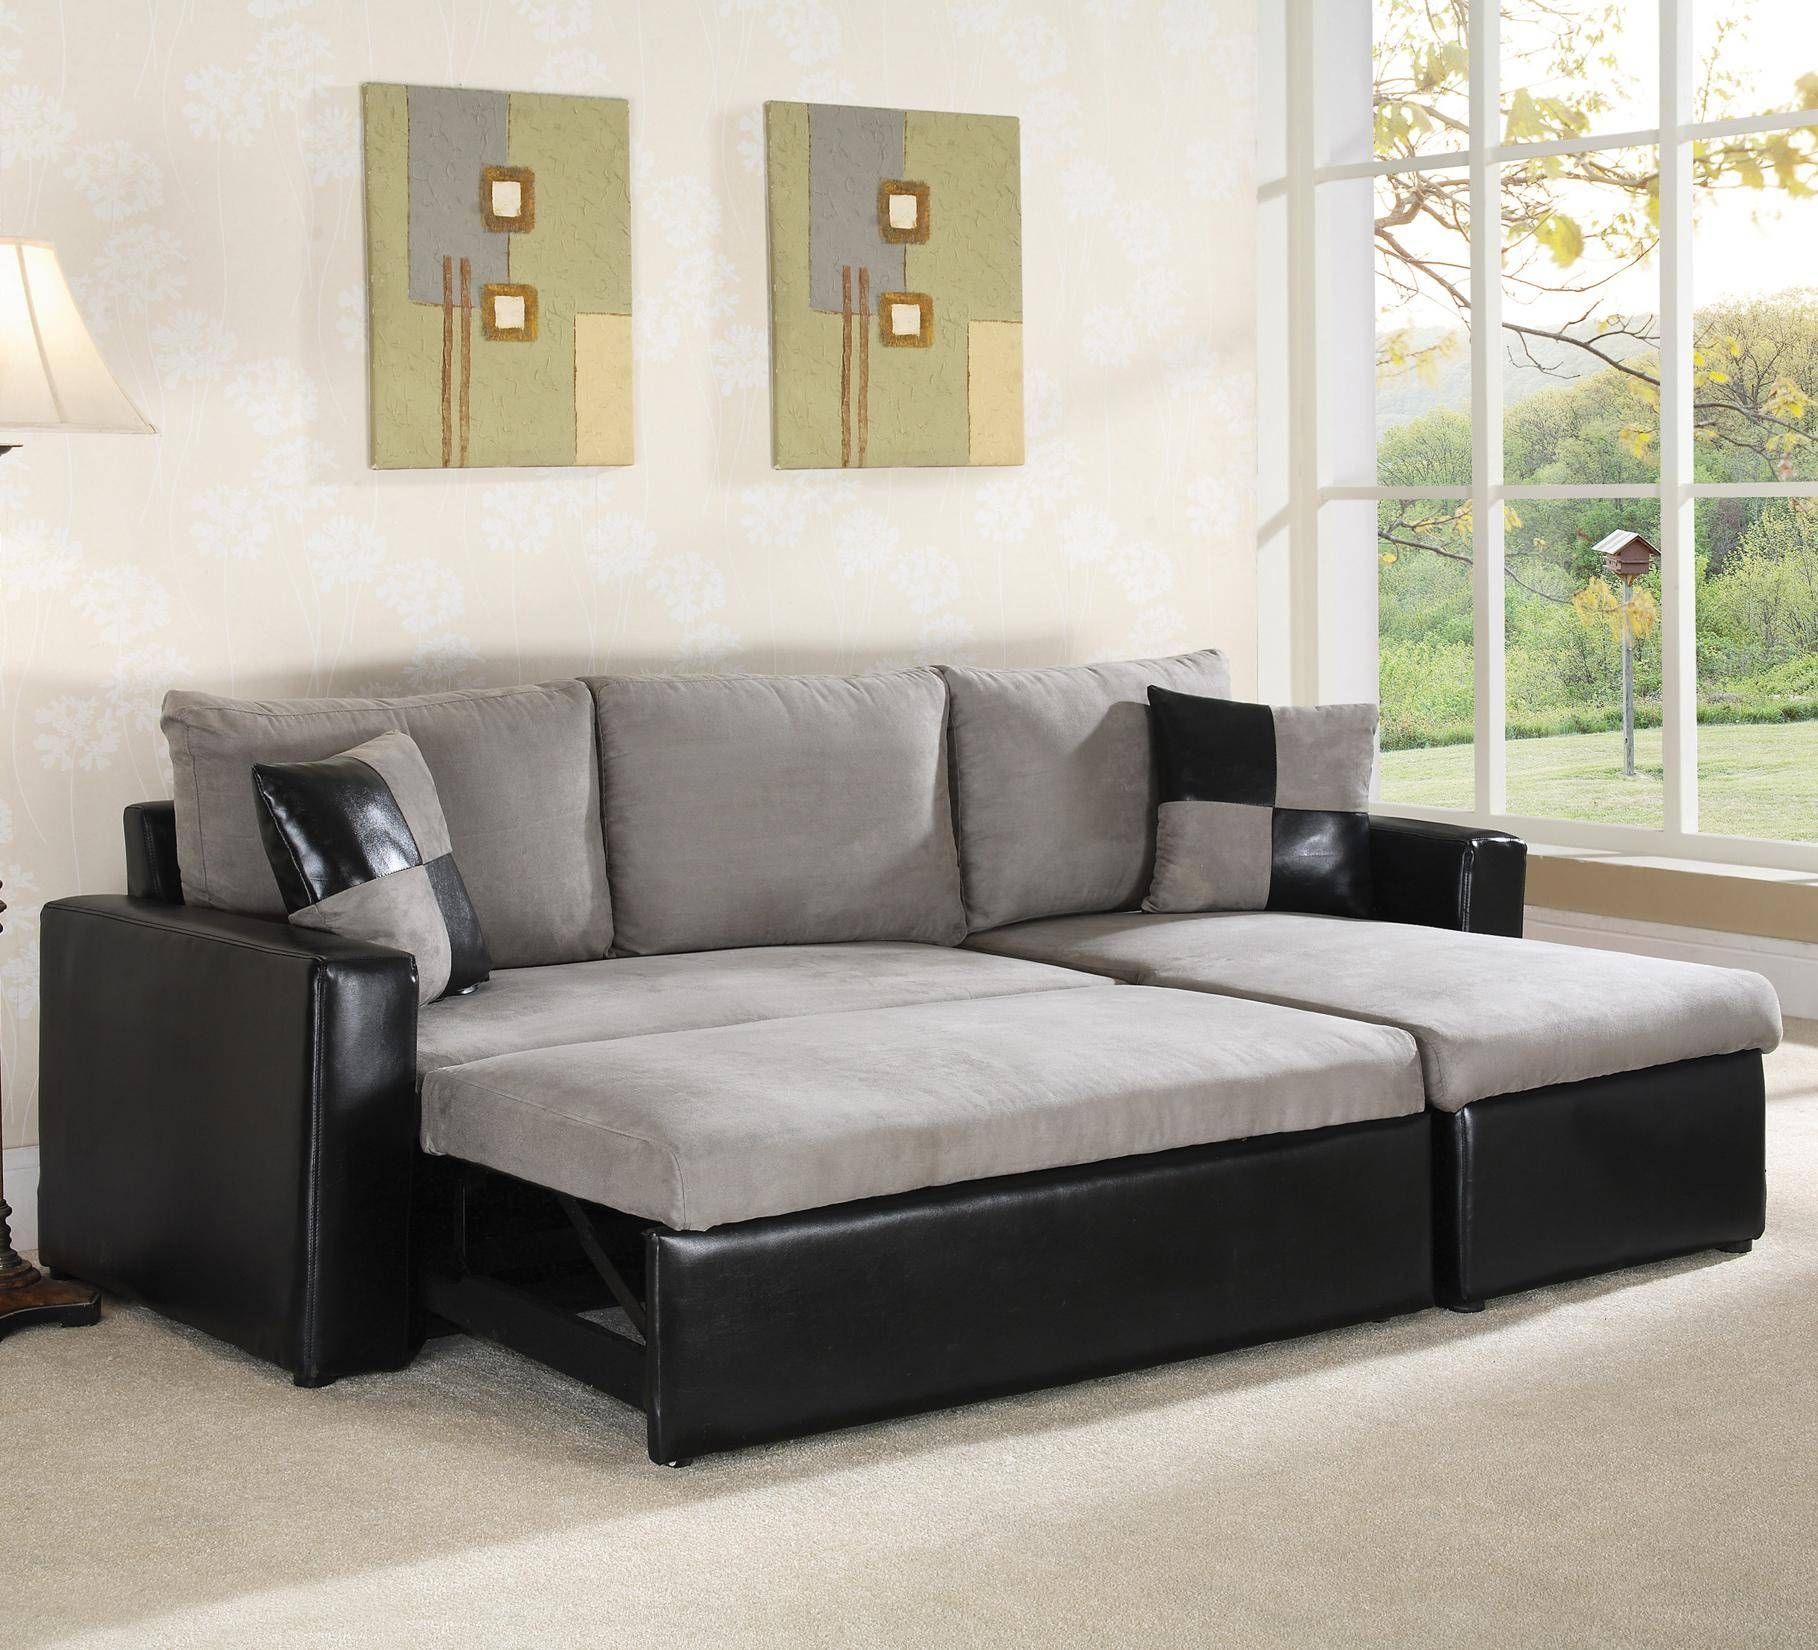 Wonderful Sleeper Sectional Sofa With Chaise Latest Cheap In Cozy Sectional Sofas (Photo 25 of 30)